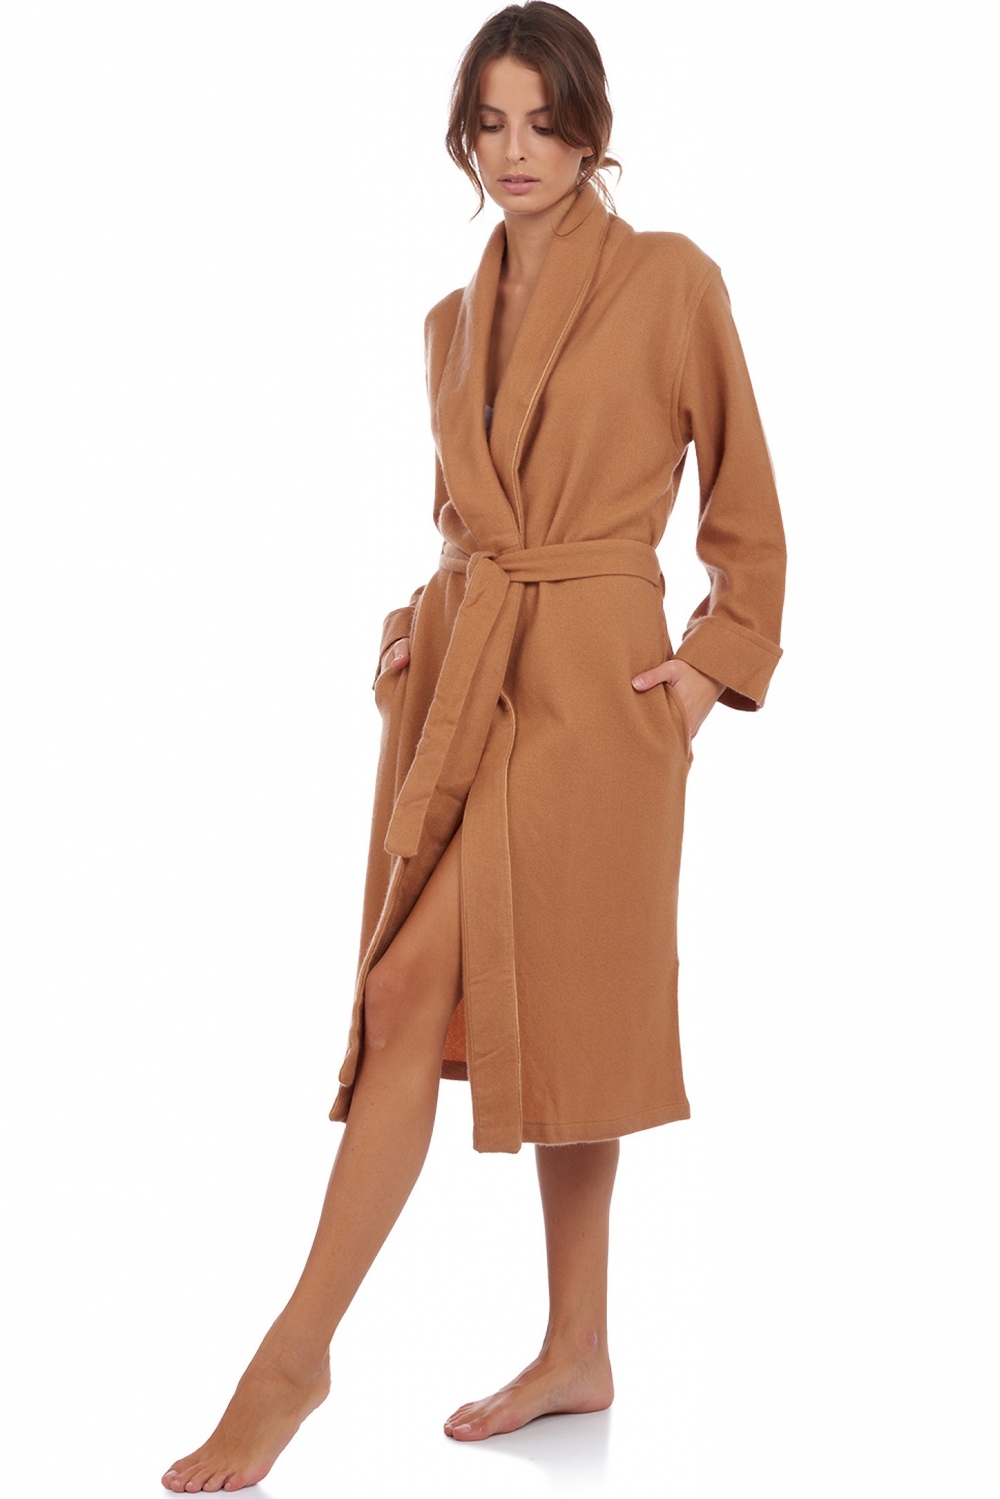 Cashmere accessories cocooning mylady camel desert s3